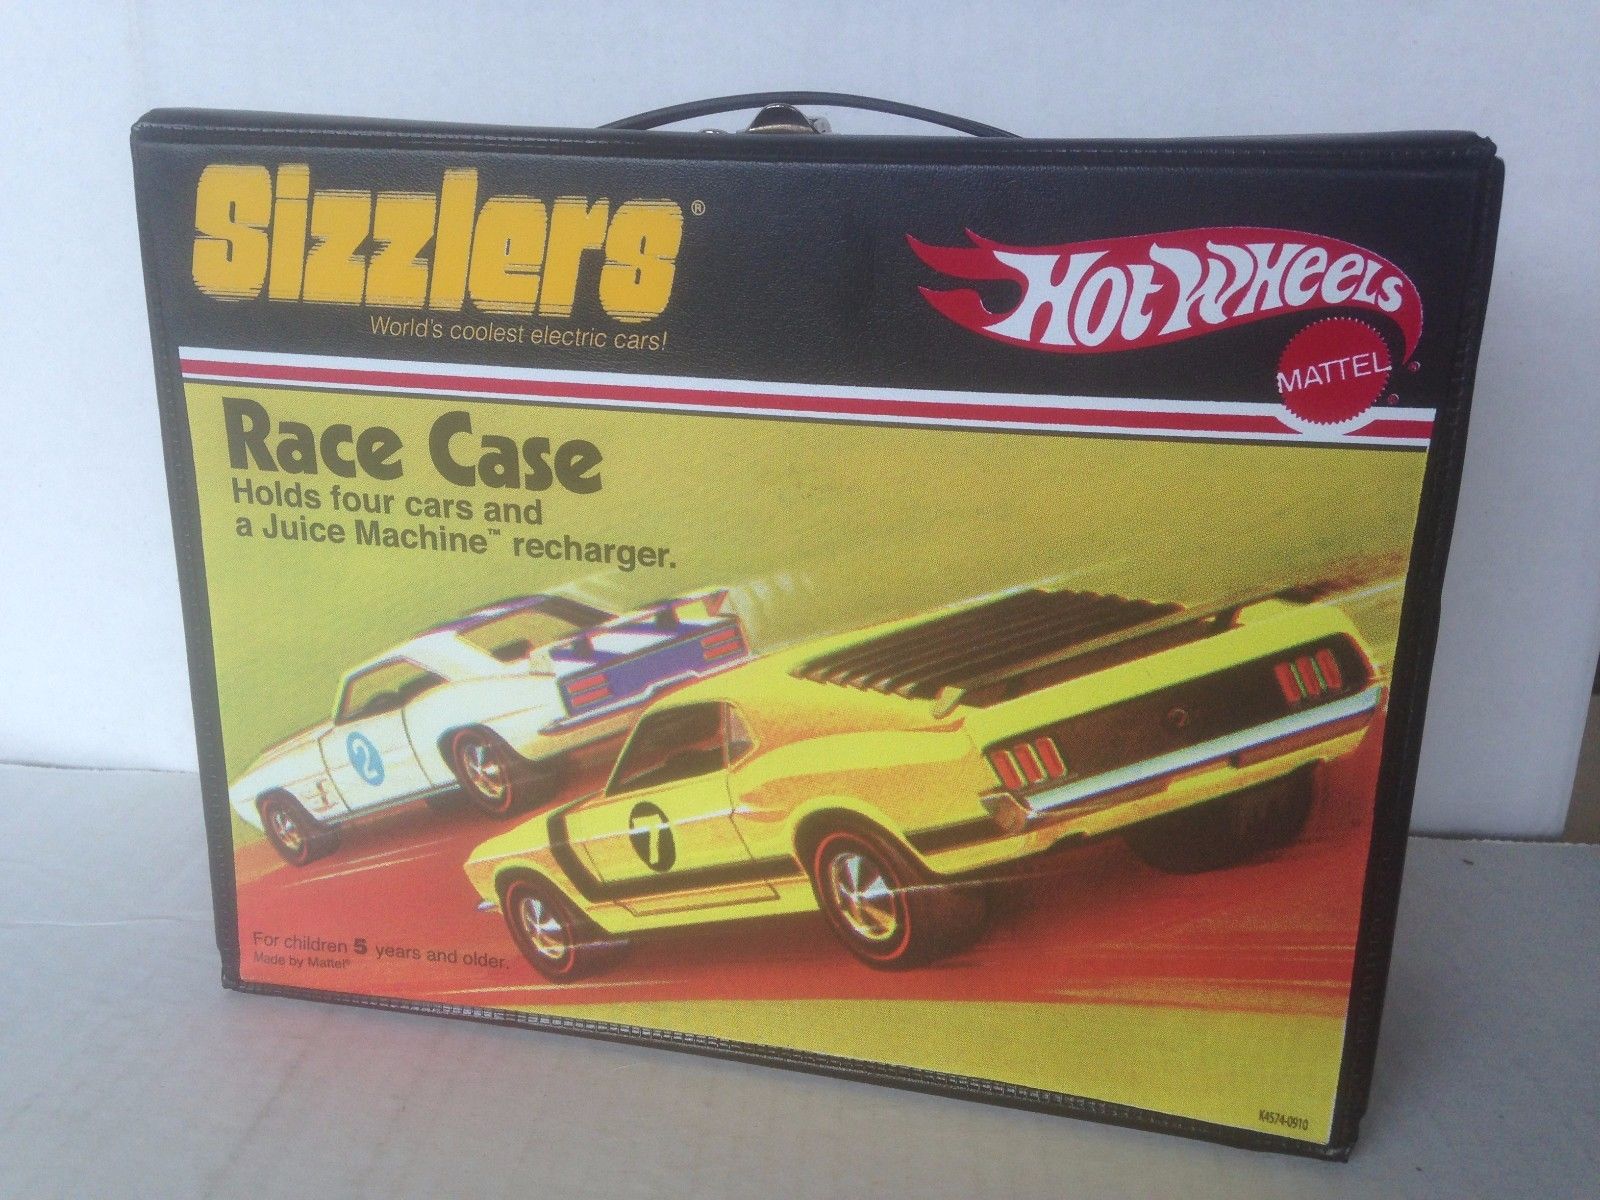 Sizzlers Hot Wheels Race Case with Gas Pump      2006       Mattel